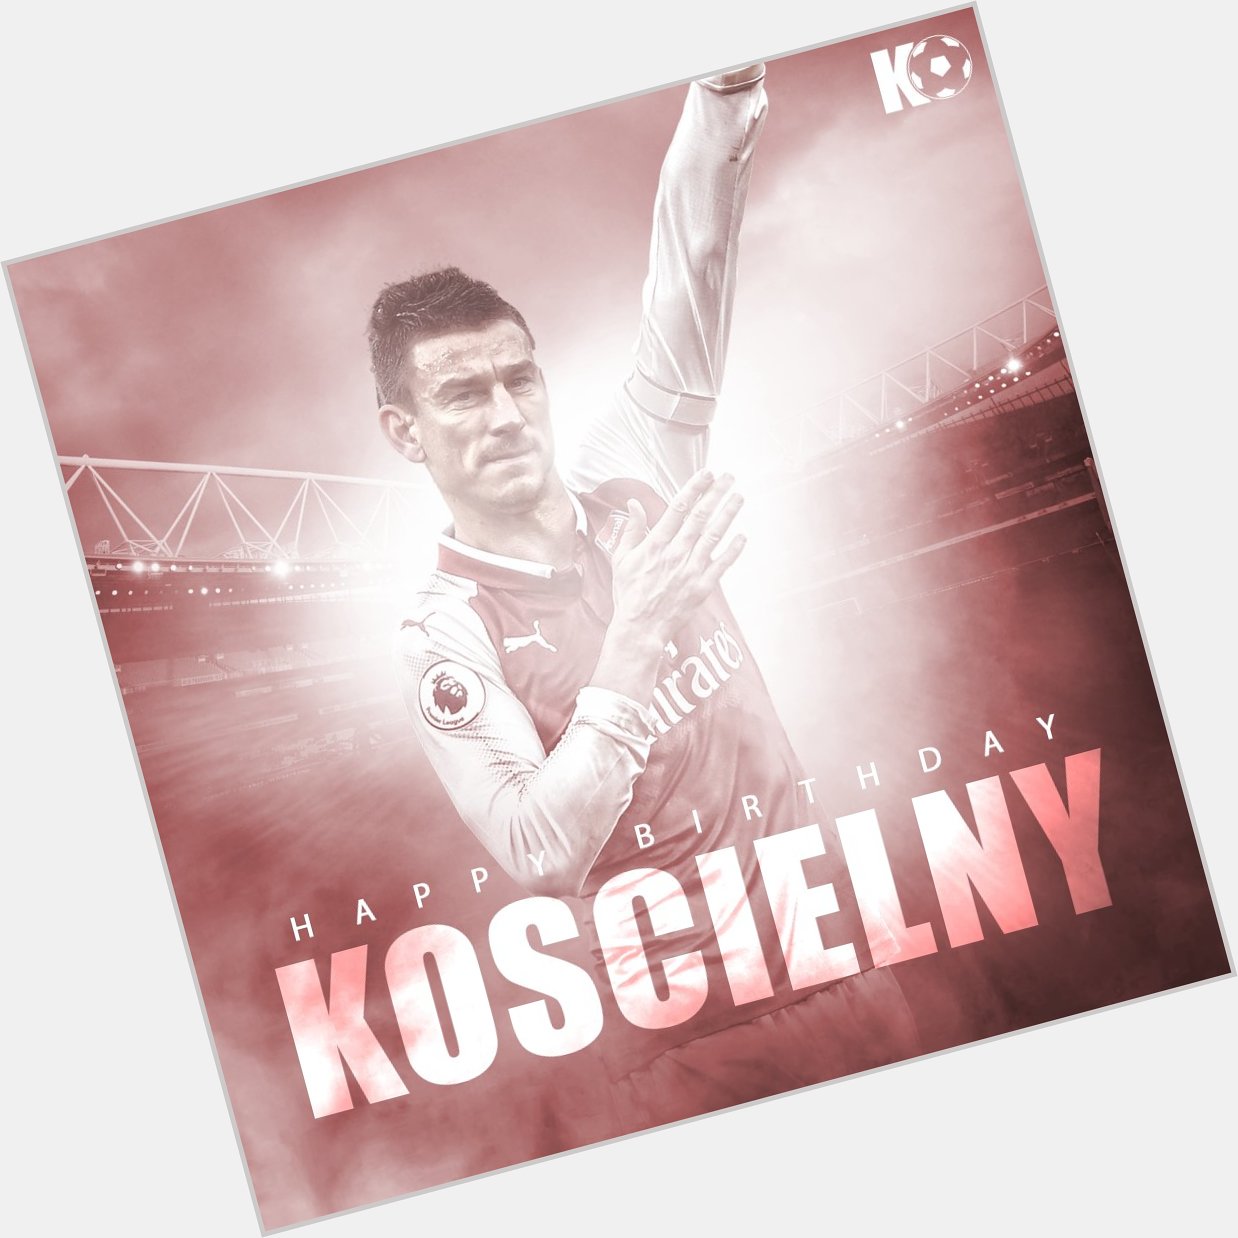 The Arsenal defender turns 33 today! Join in wishing Laurent Koscielny a Happy Birthday! 